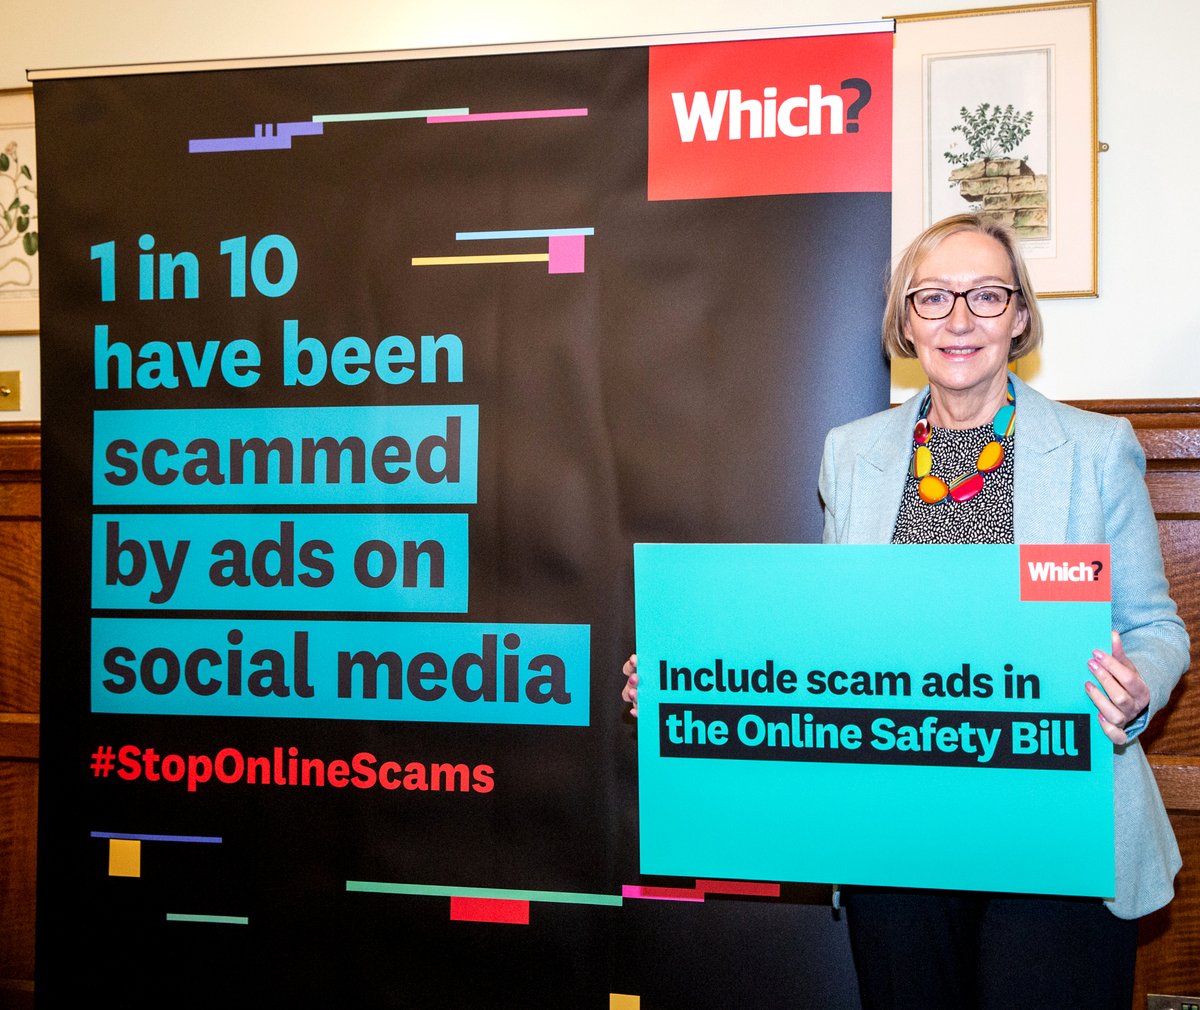 This week I spoke to @WhichUK about tackling online scams. Scam ads are ruining lives, with Tech Giants continuing to profit from victims' misery. 

I urge the Government to help #StopOnlineScams by including paid-for ads in the Online Safety Bill.